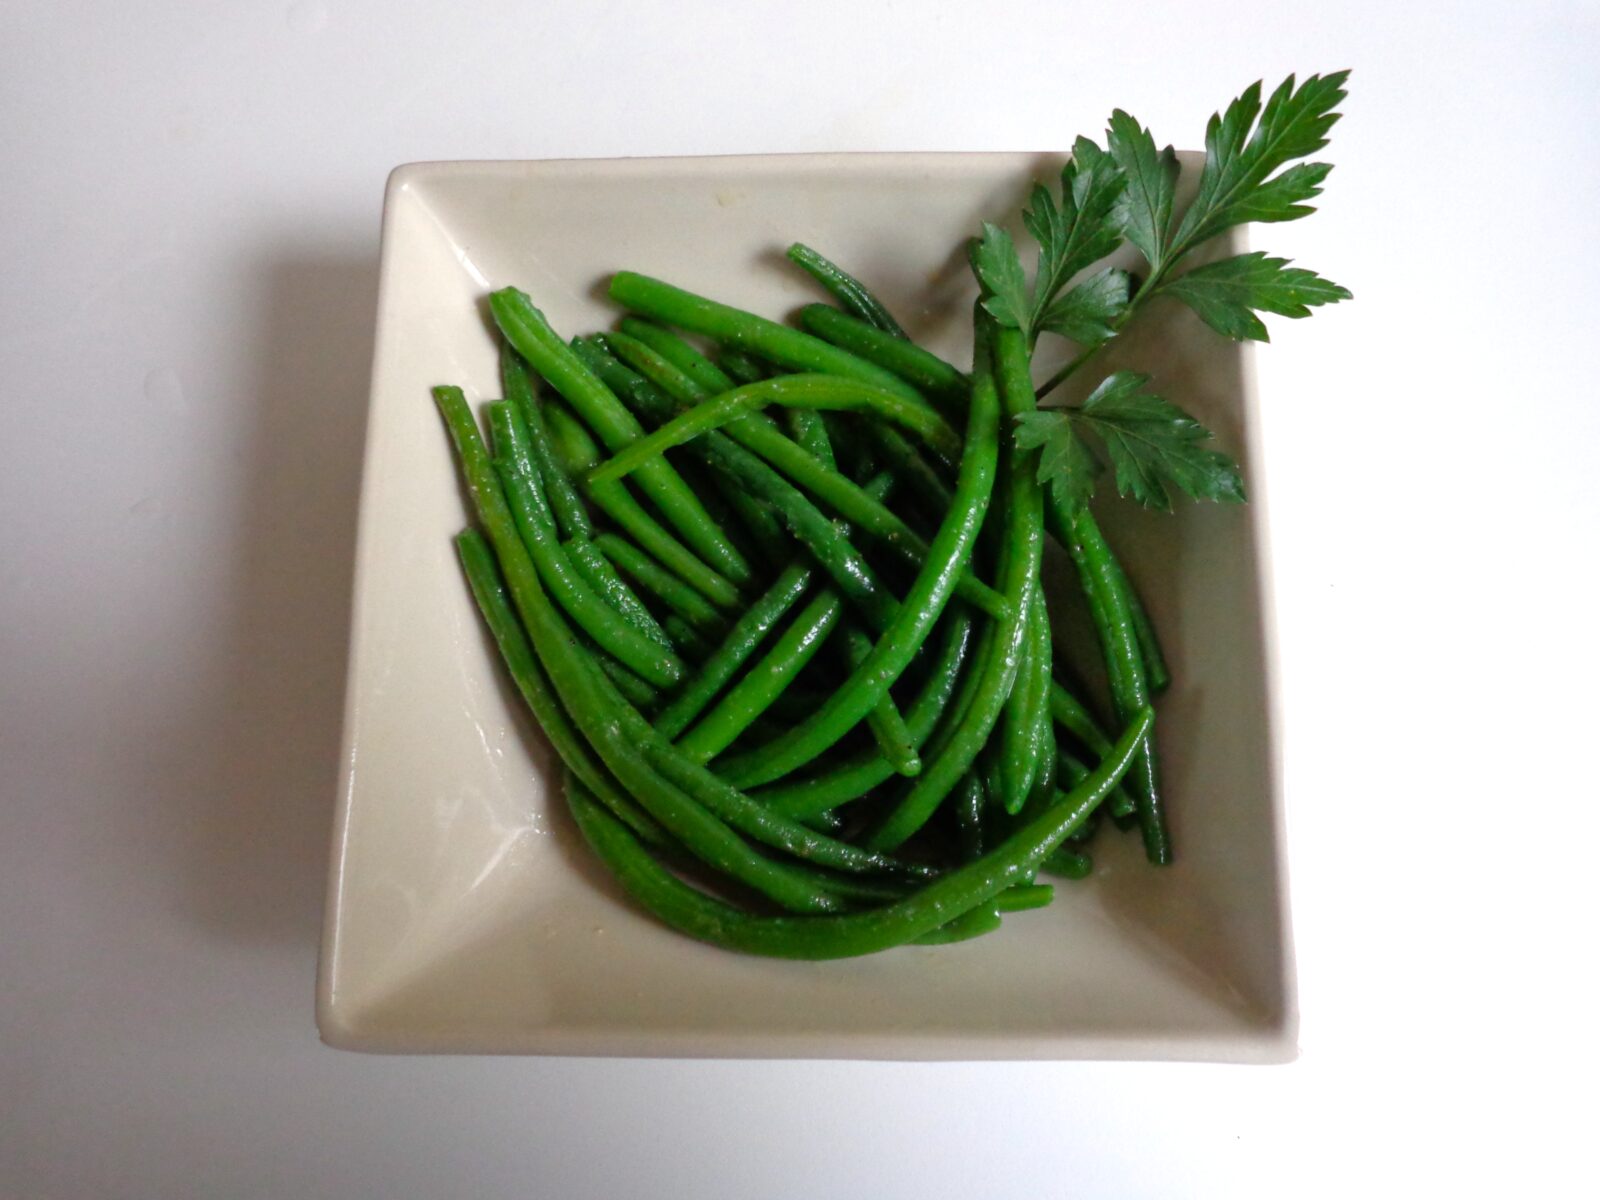 Haricot Verts - Green Beans With a French Flair